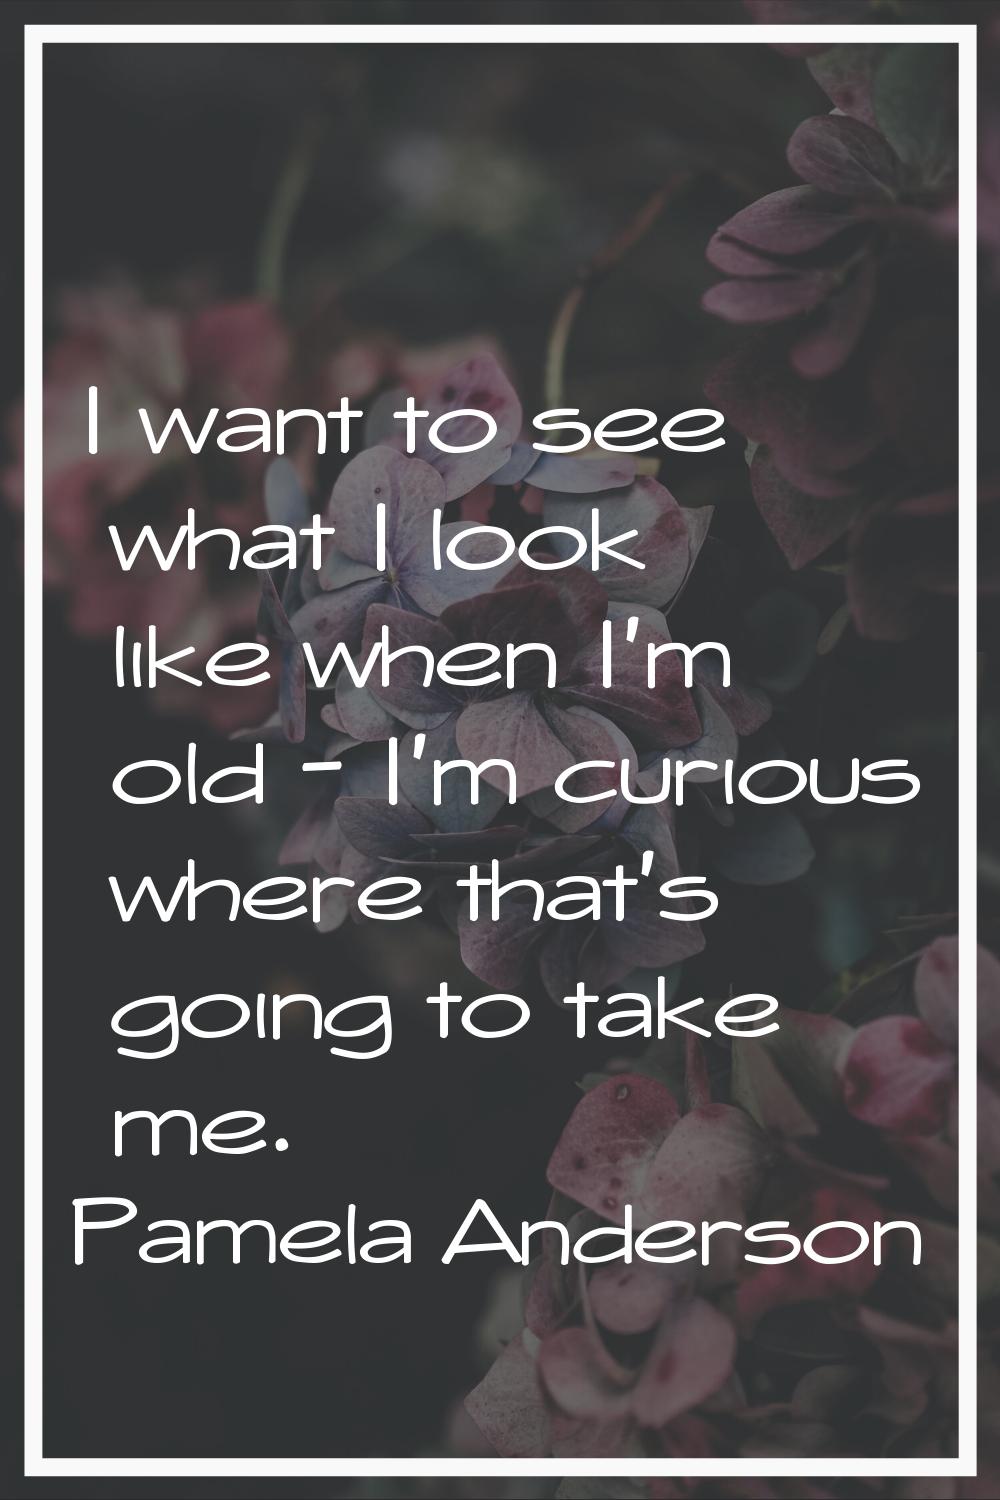 I want to see what I look like when I'm old - I'm curious where that's going to take me.